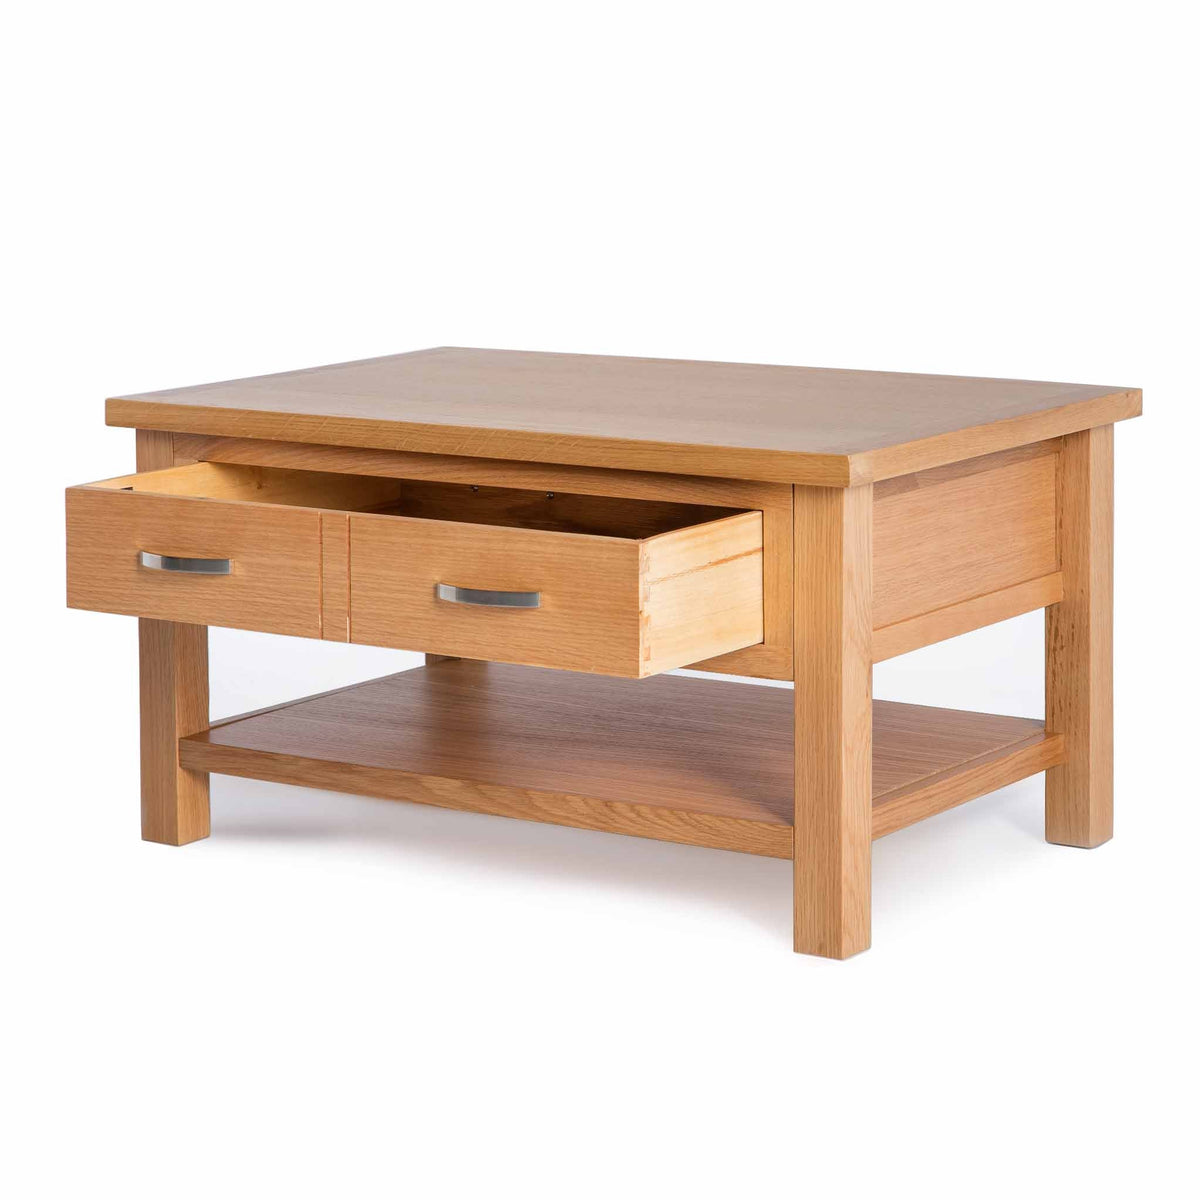 London Oak Coffee Table with Drawer - Side View with Drawer Open